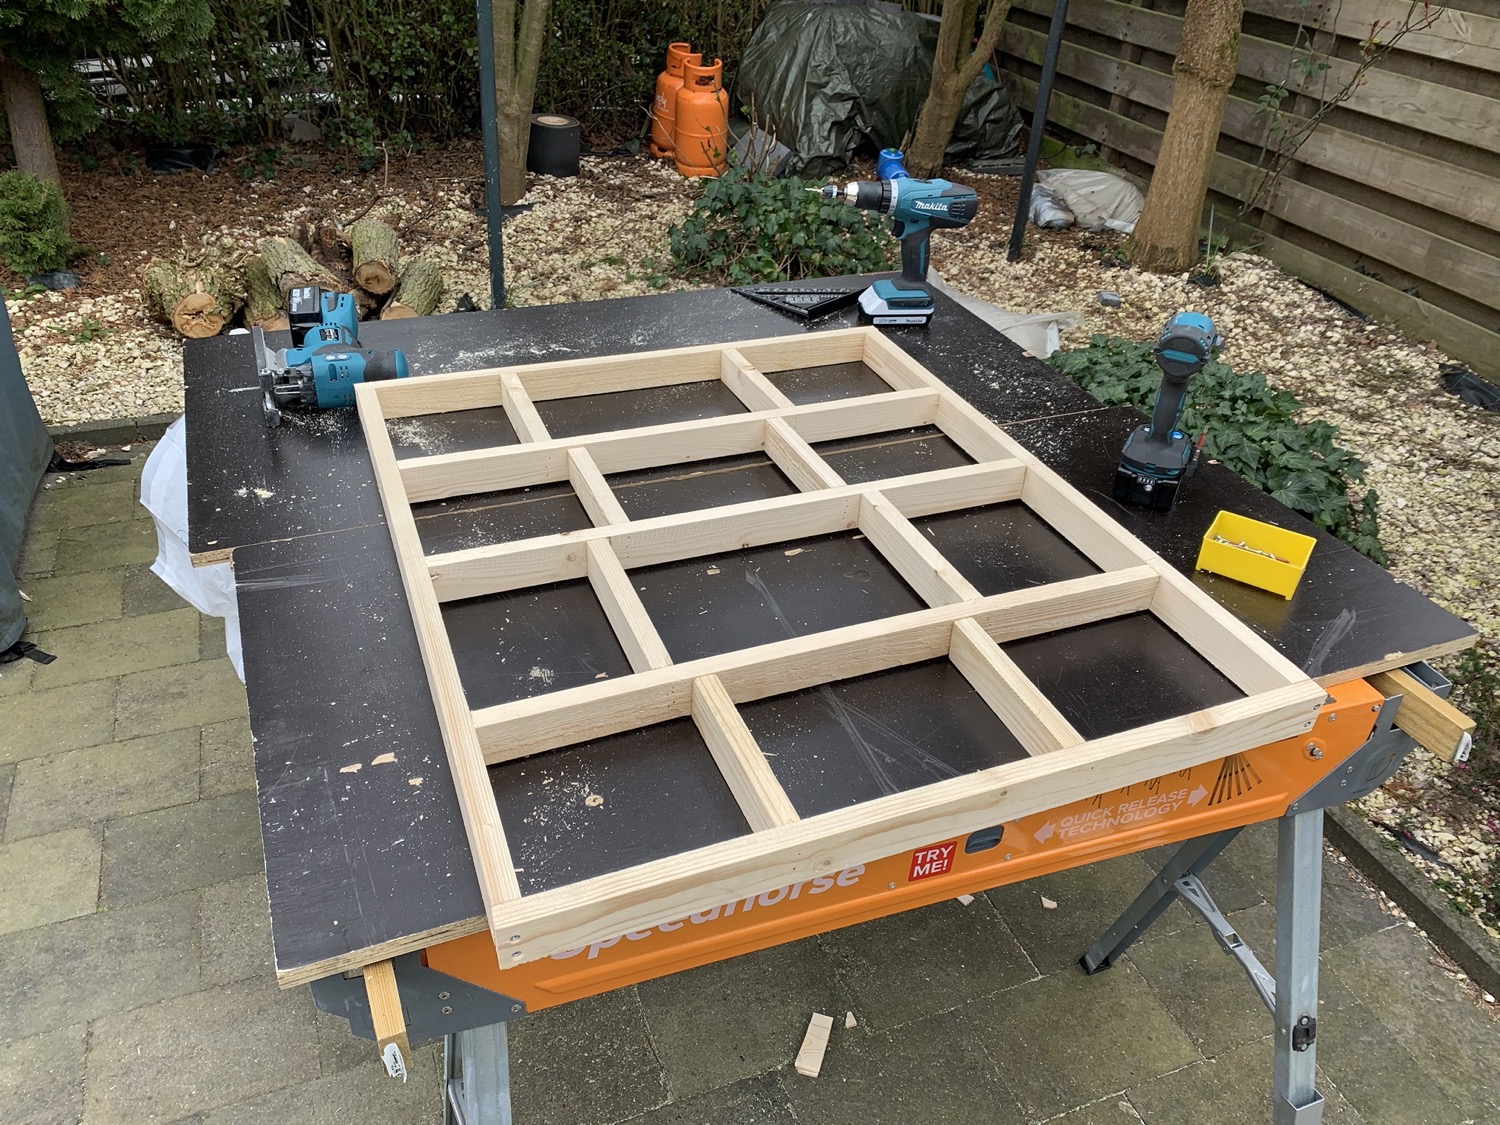 Floor frame, with extra cross beams (*noggins*) for weight support.